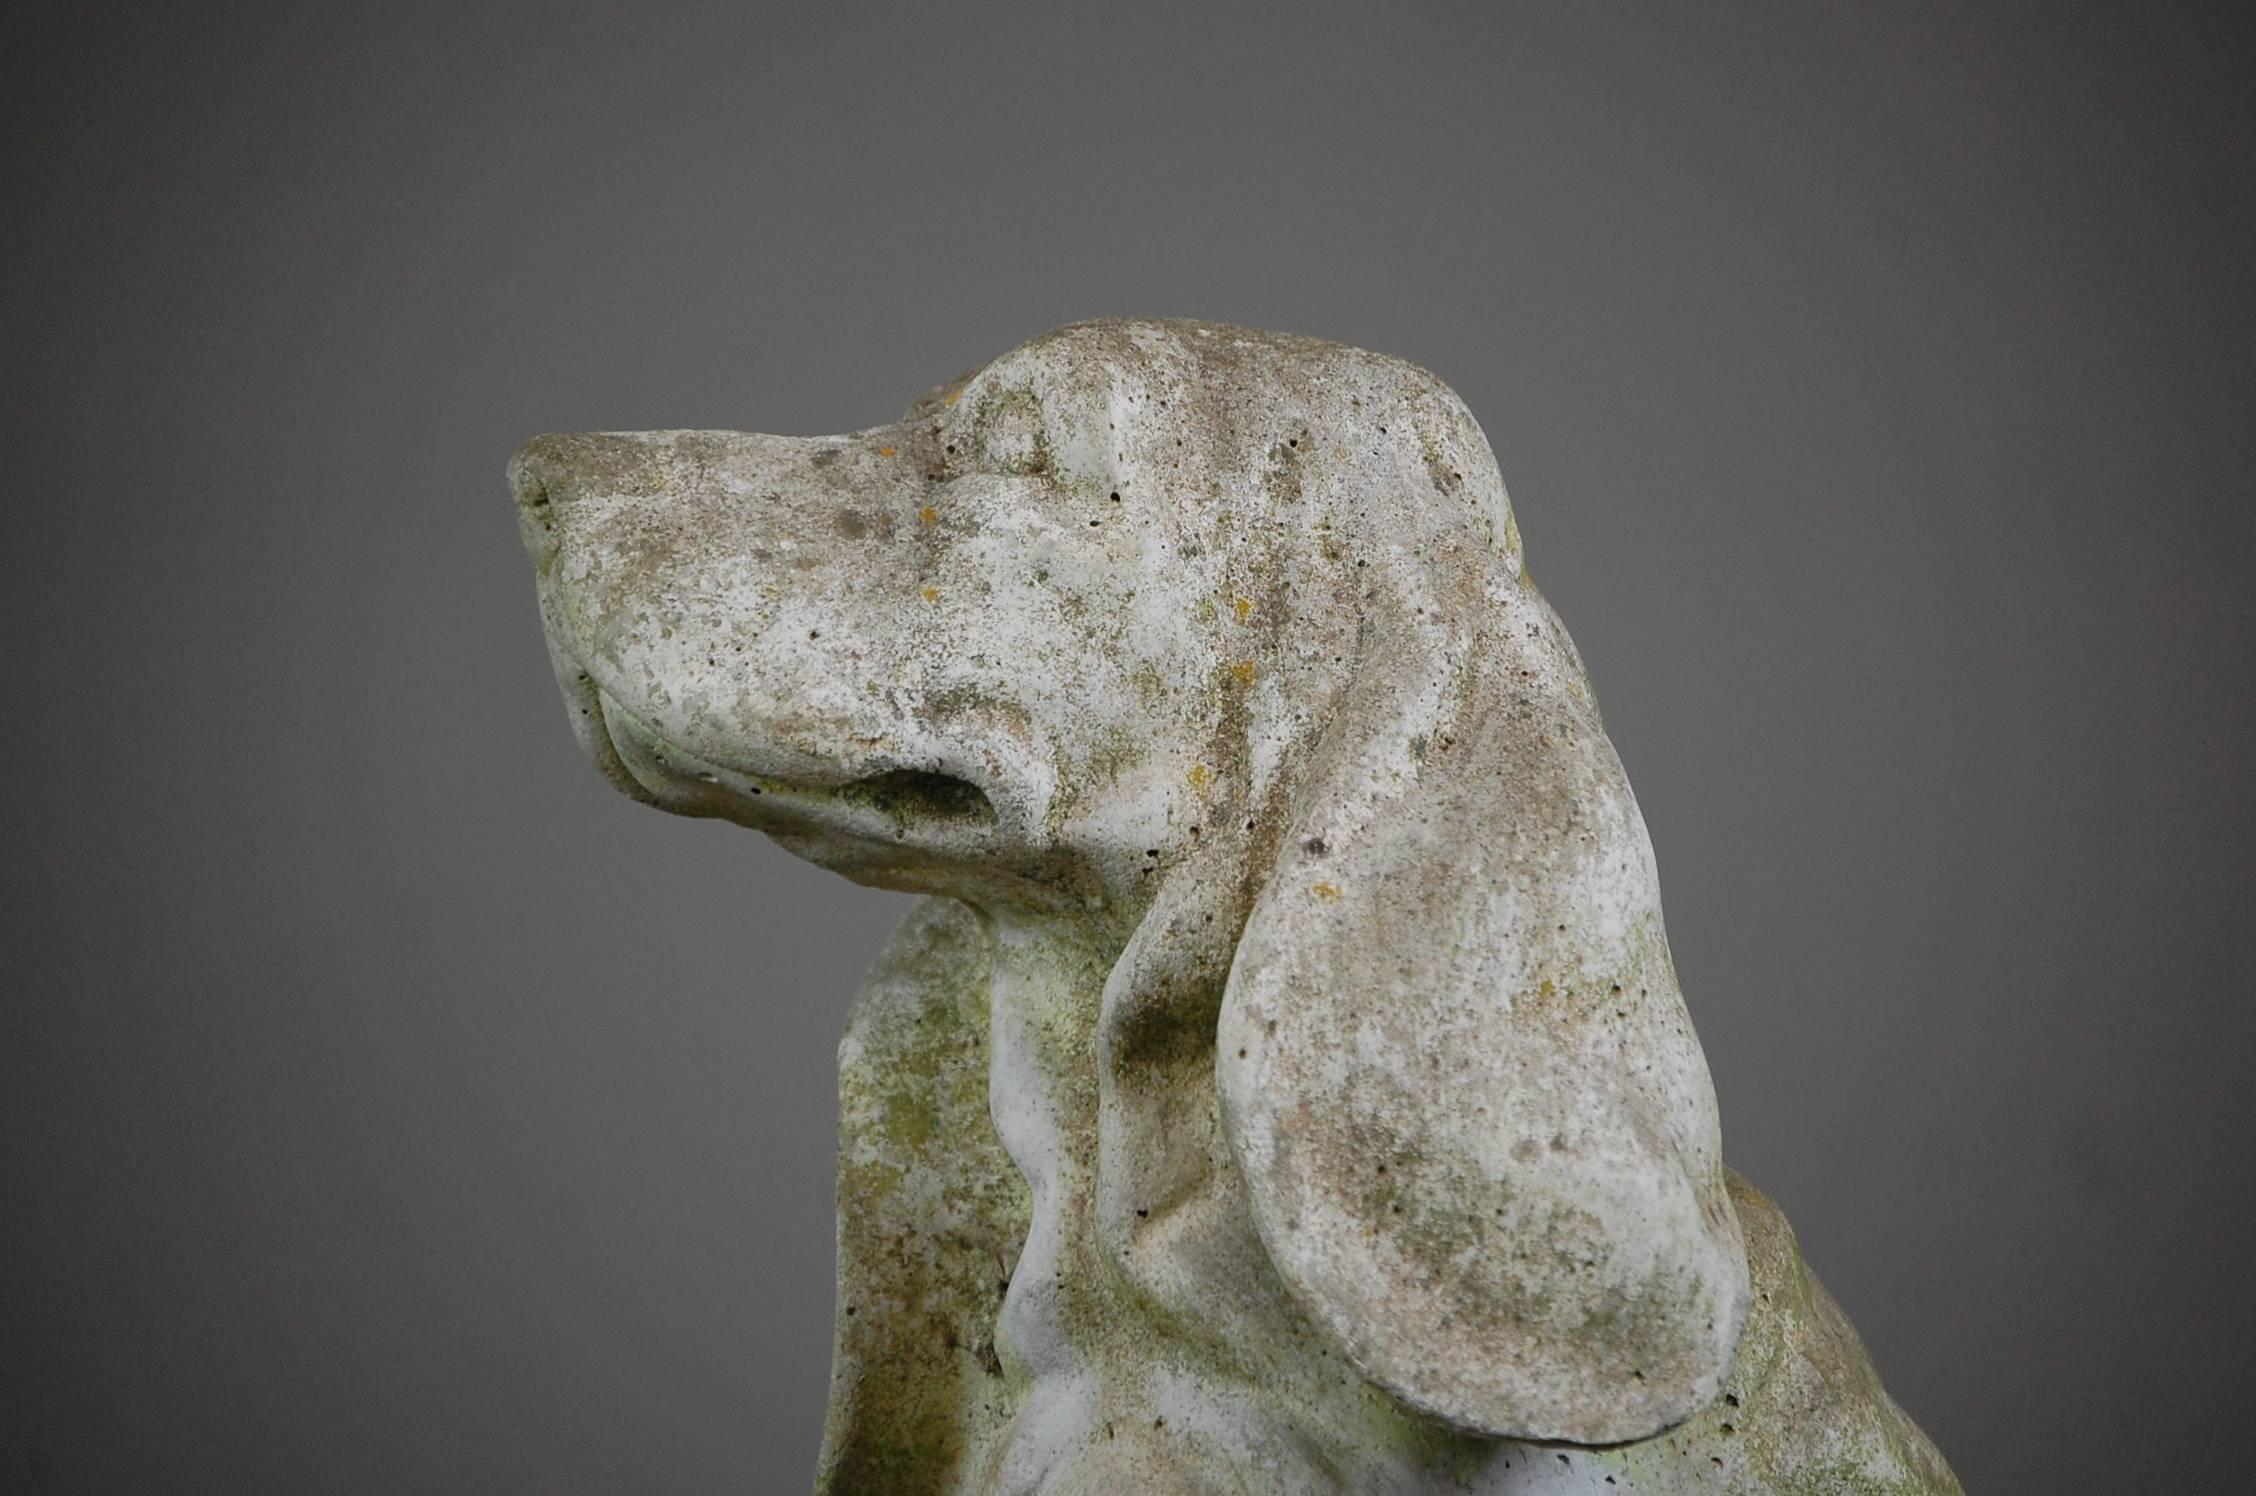 Cast concrete Bassett hound, shows honest weathered wear from a life outdoors. Detailed casting shows every wrinkle on this eager to please sitting dog. French, circa 1950.